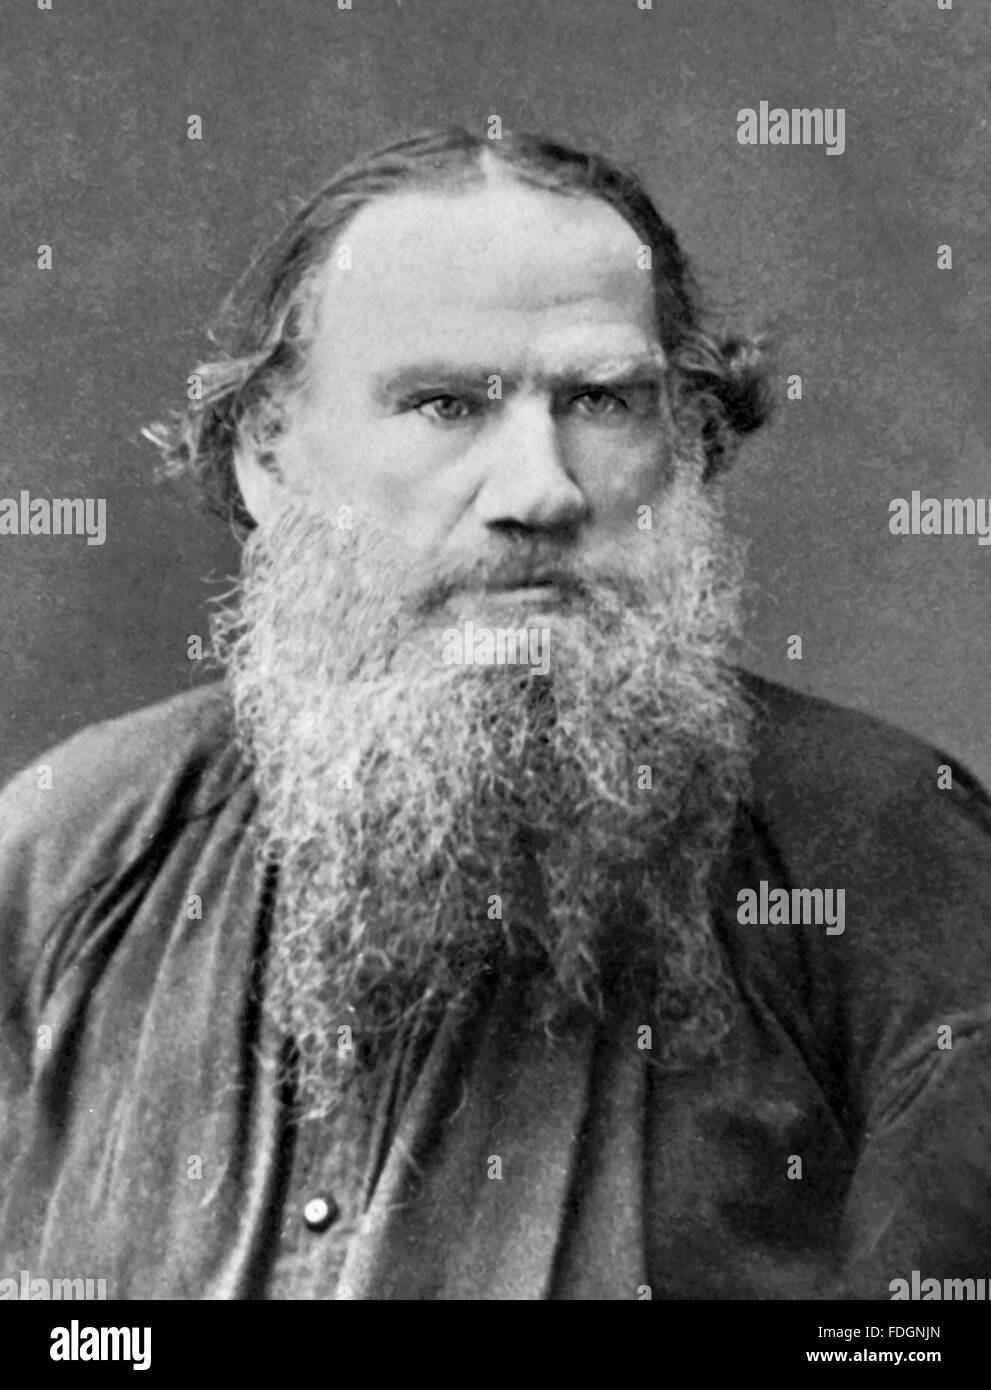 Leo Tolstoy. Portrait of the  Russian writer Count Lev Nikolayevich Tolstoy, c.1880-1886 Stock Photo